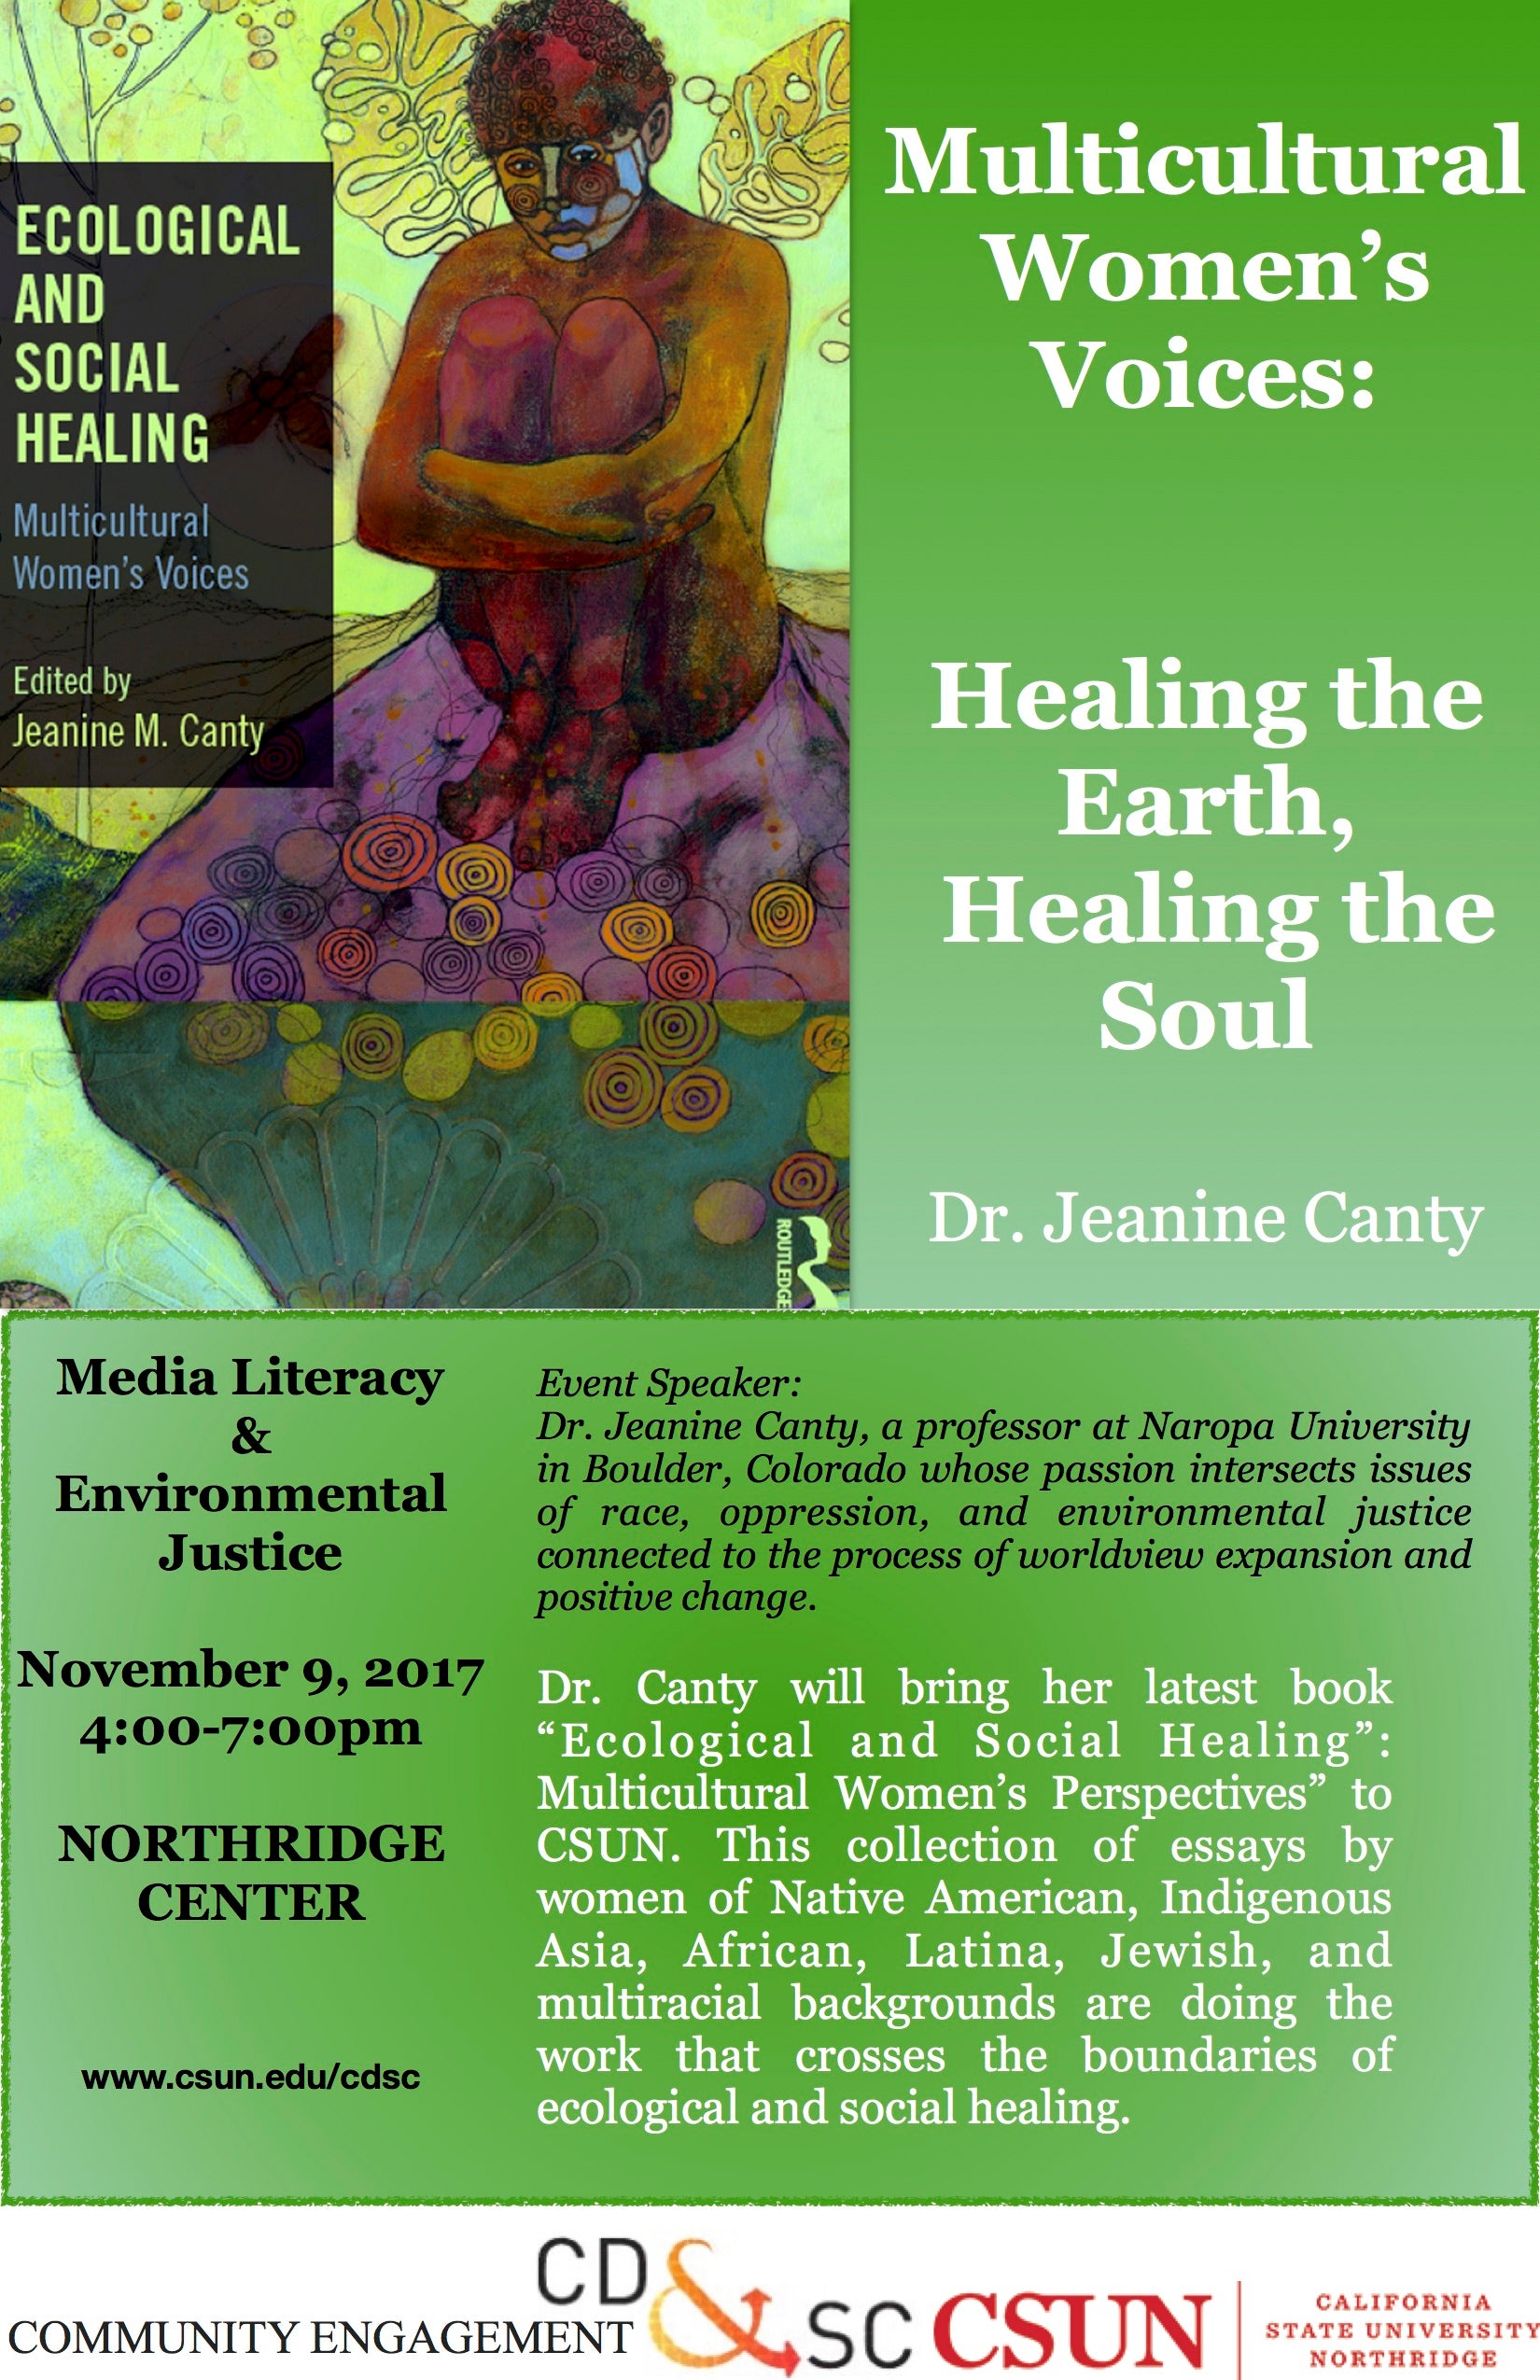 Multicultural Women's Voices: Healing the Earth, Healing the Soul